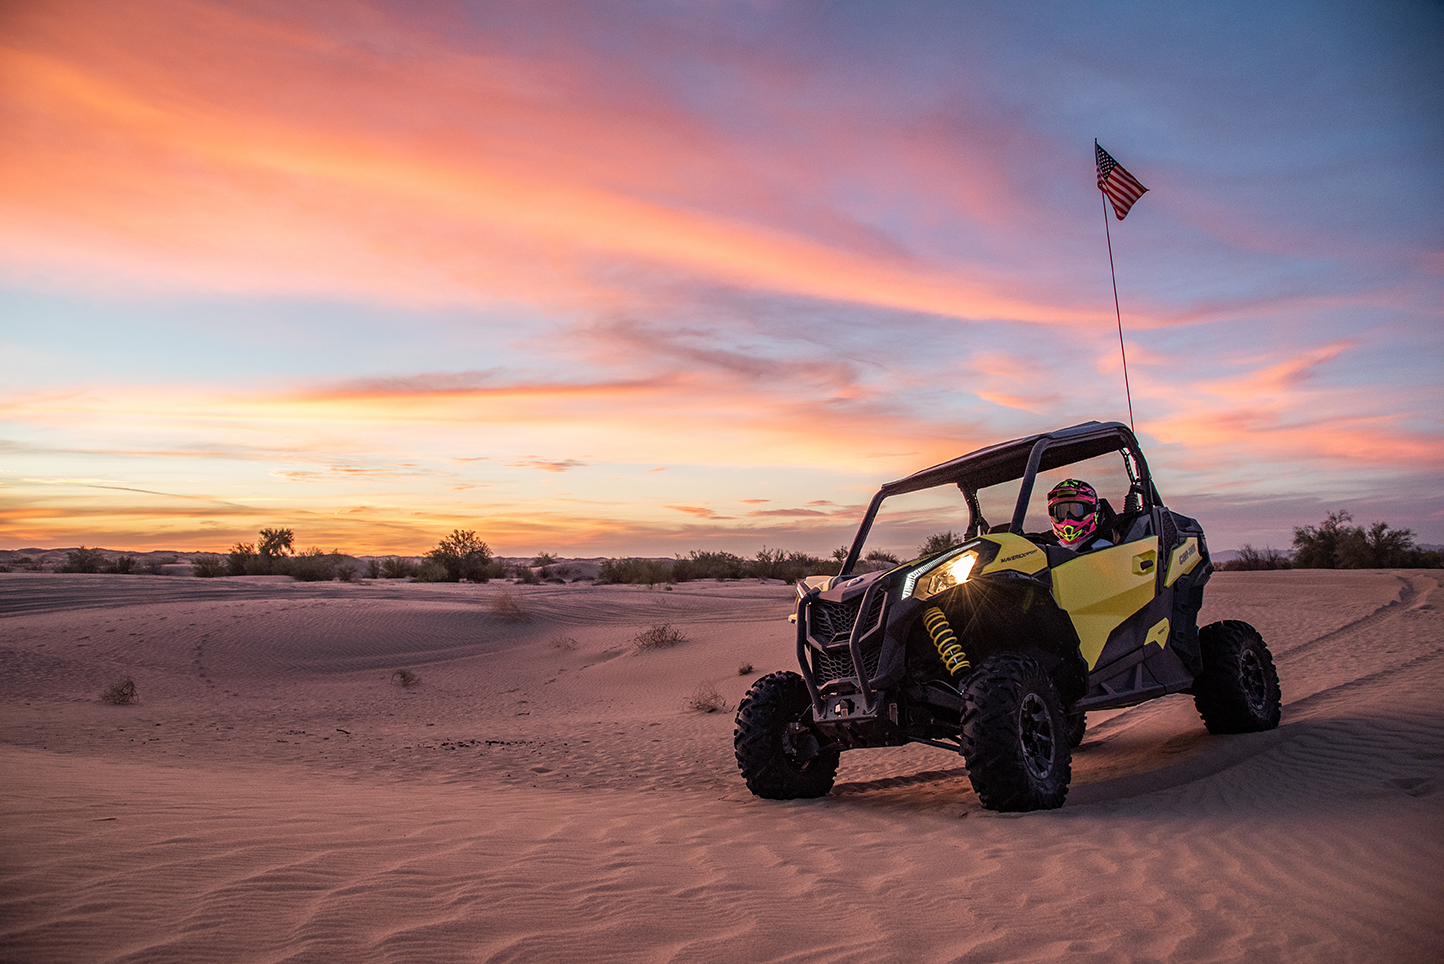 1800 miles in a Can-Am Maverick Sport DPS 1000R -- Going from Colorado’s 12,000 foot mountains to the sand dunes to the vast desert trails. 